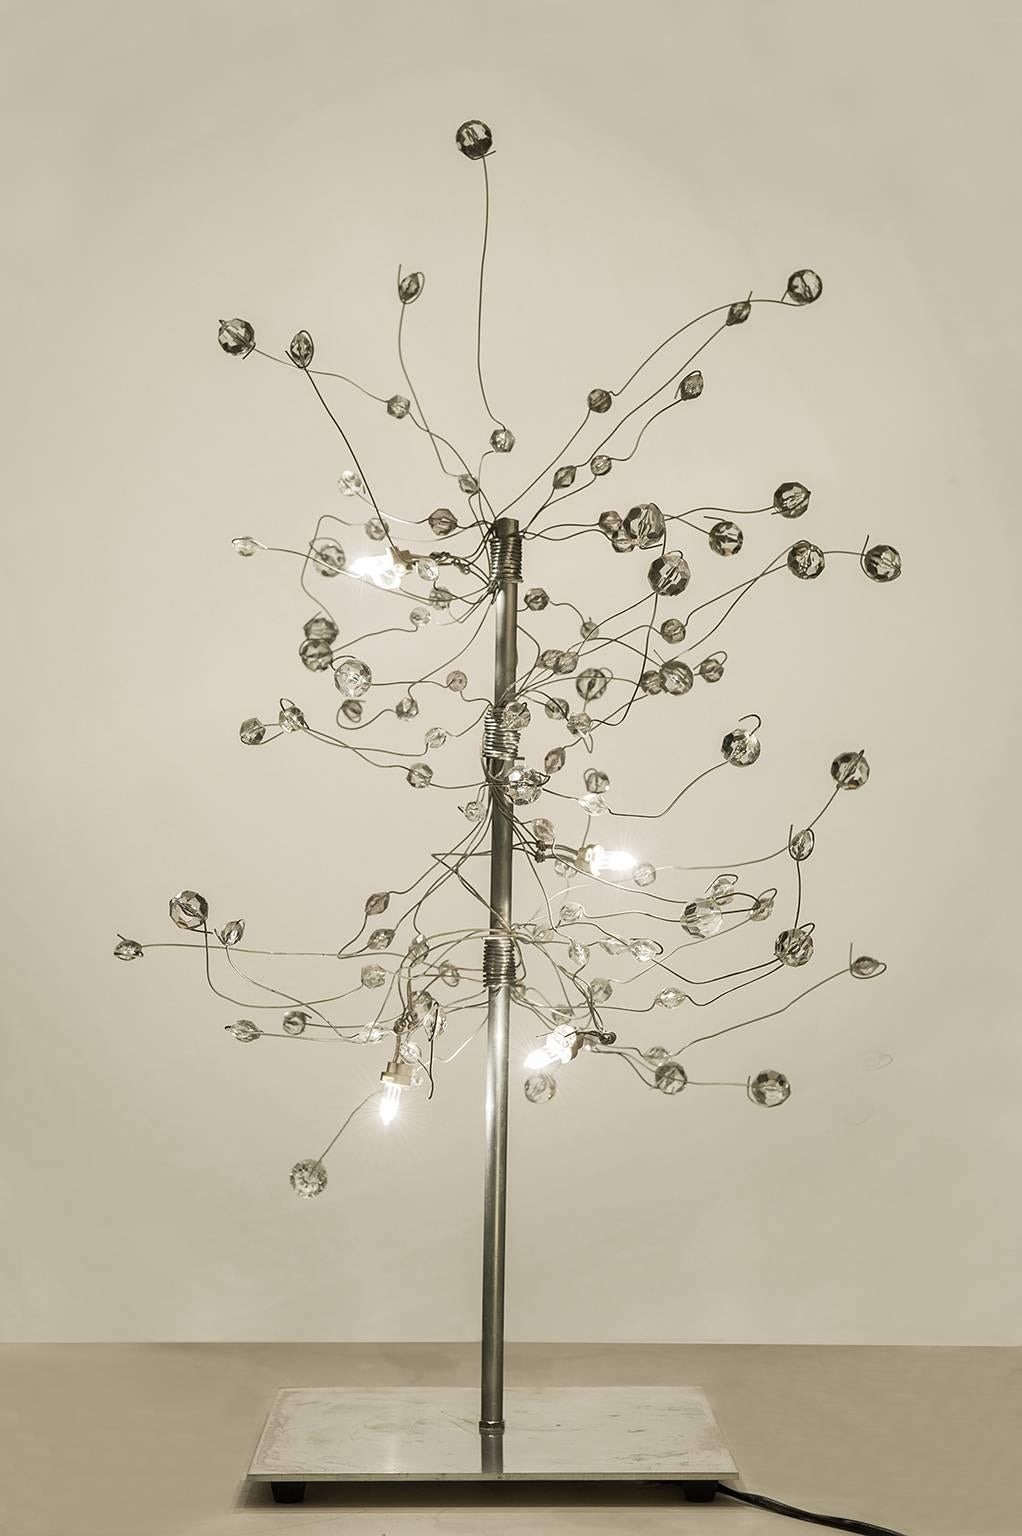 O/5003 -  Unusual and elegant tree shaped Table  led lamp, one of the first led lamp, created by the  young artist Salih Mehci,  very famous in France for his incredible huge lightweight chandeliers .
Materials: Inox and plexiglass. 
It may be an